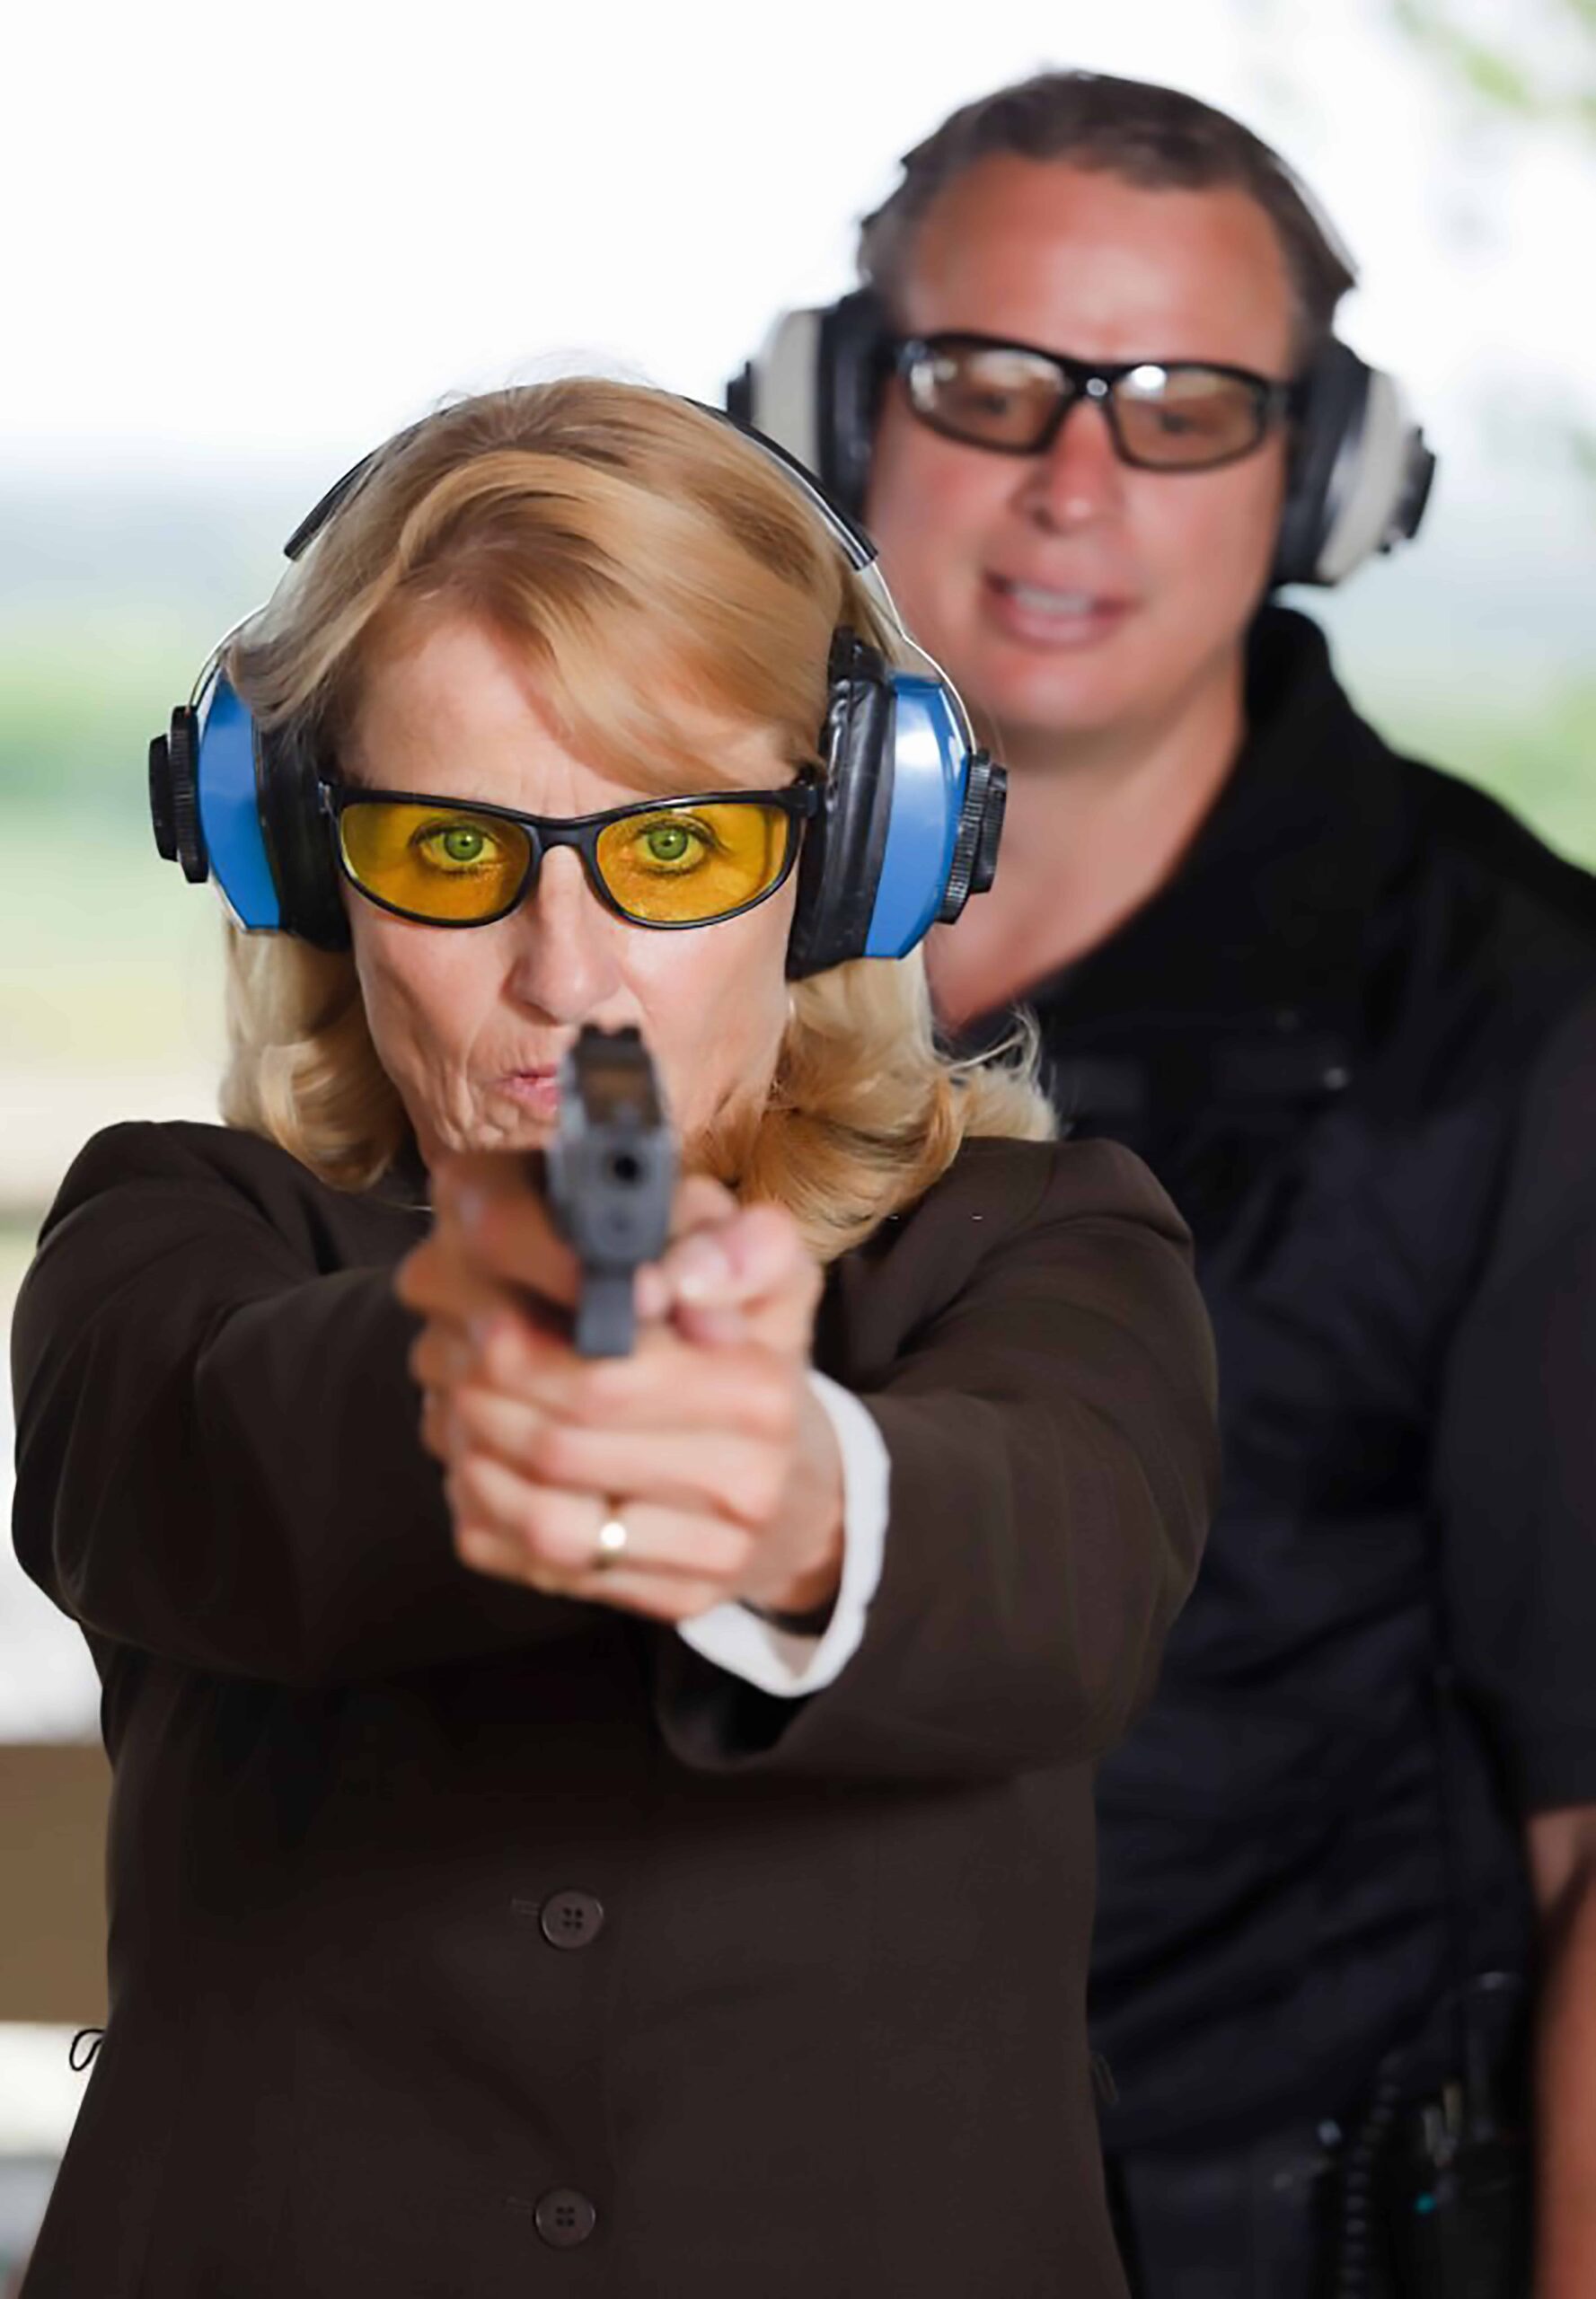 The Contents of a Good Concealed Carry Course - Texas CHL online - Texas LTC Online